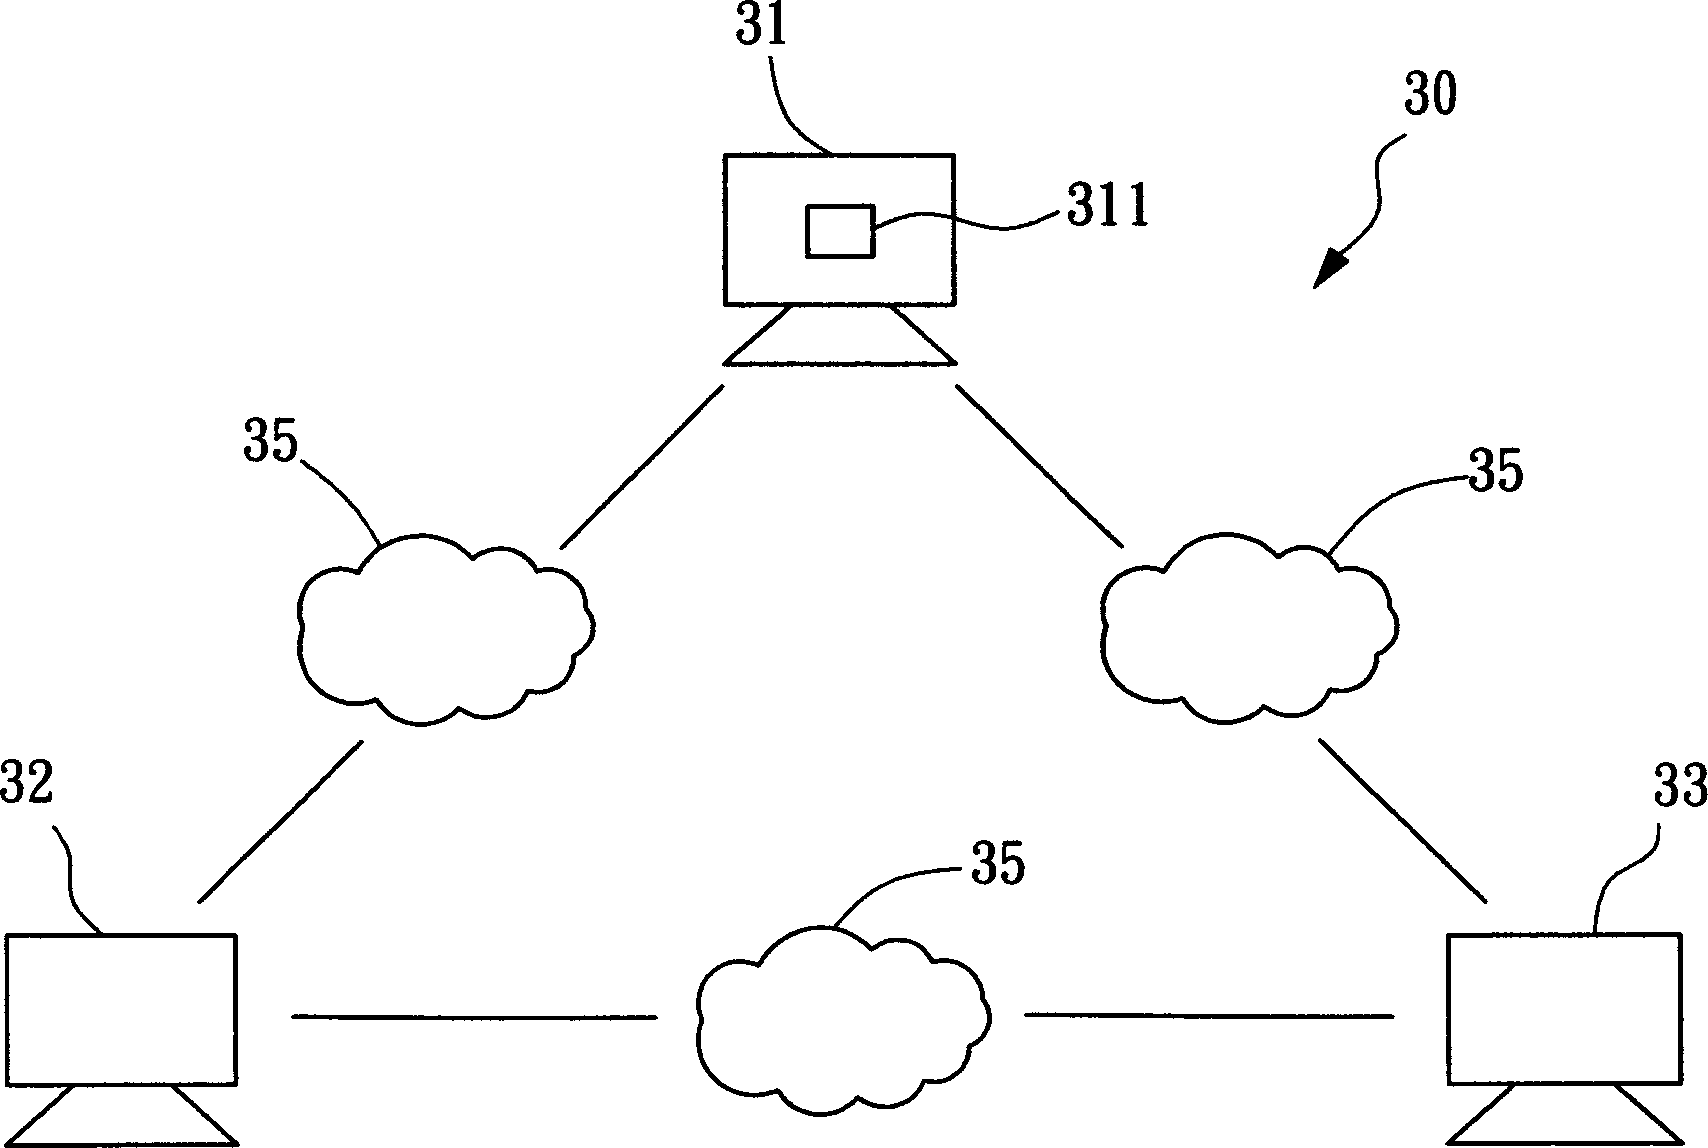 Remote electronic signature system and method